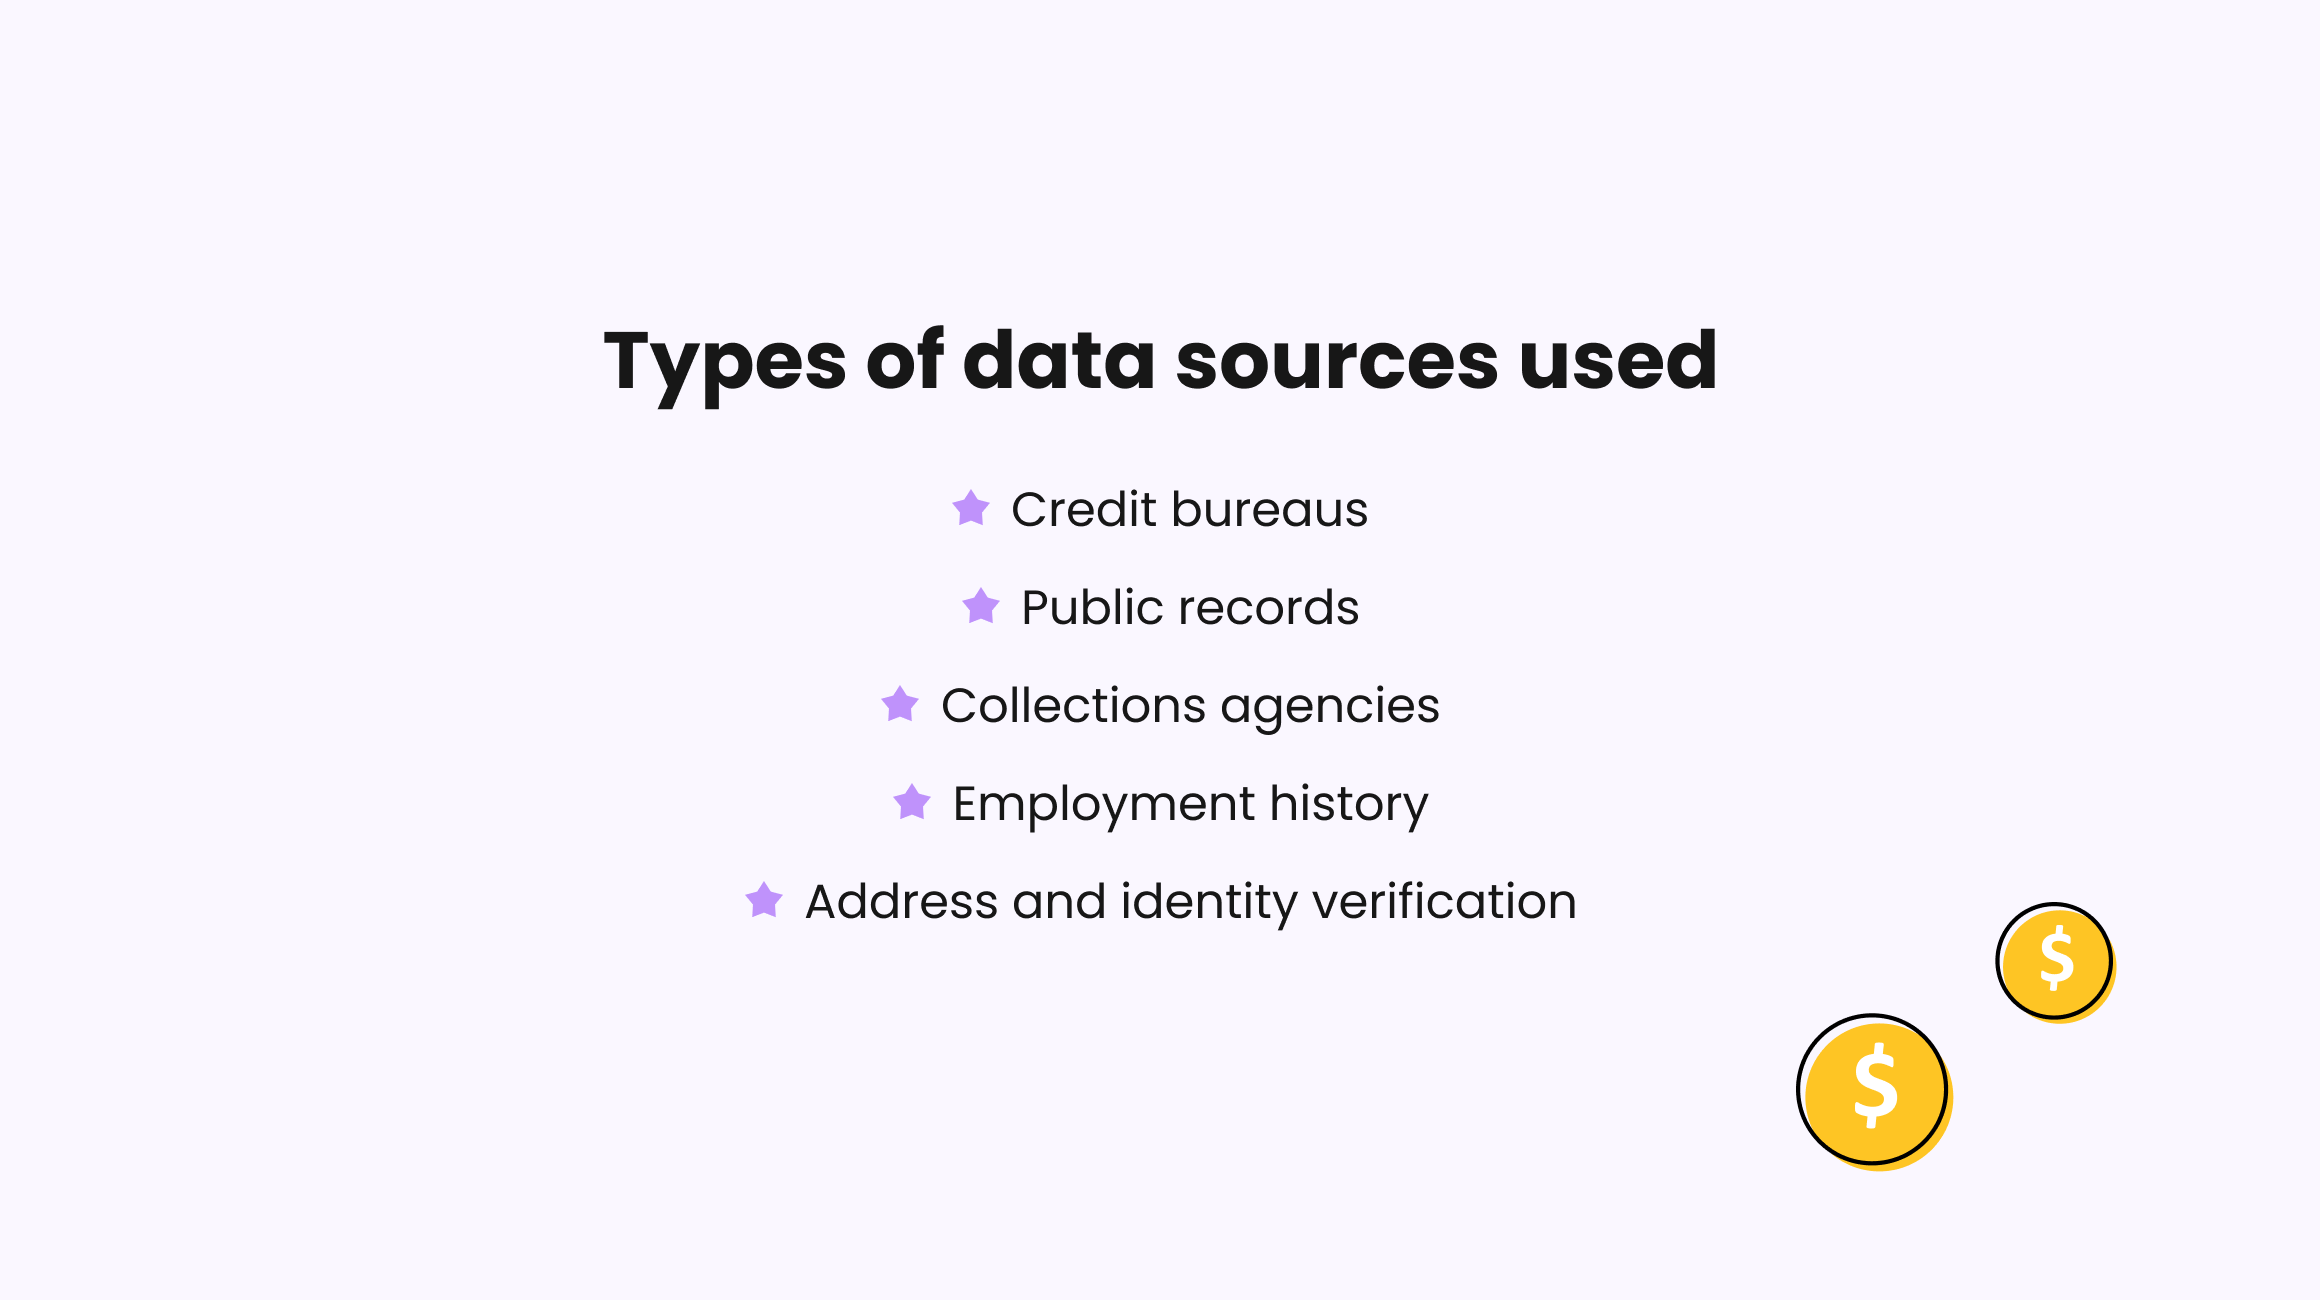 Types of data sources